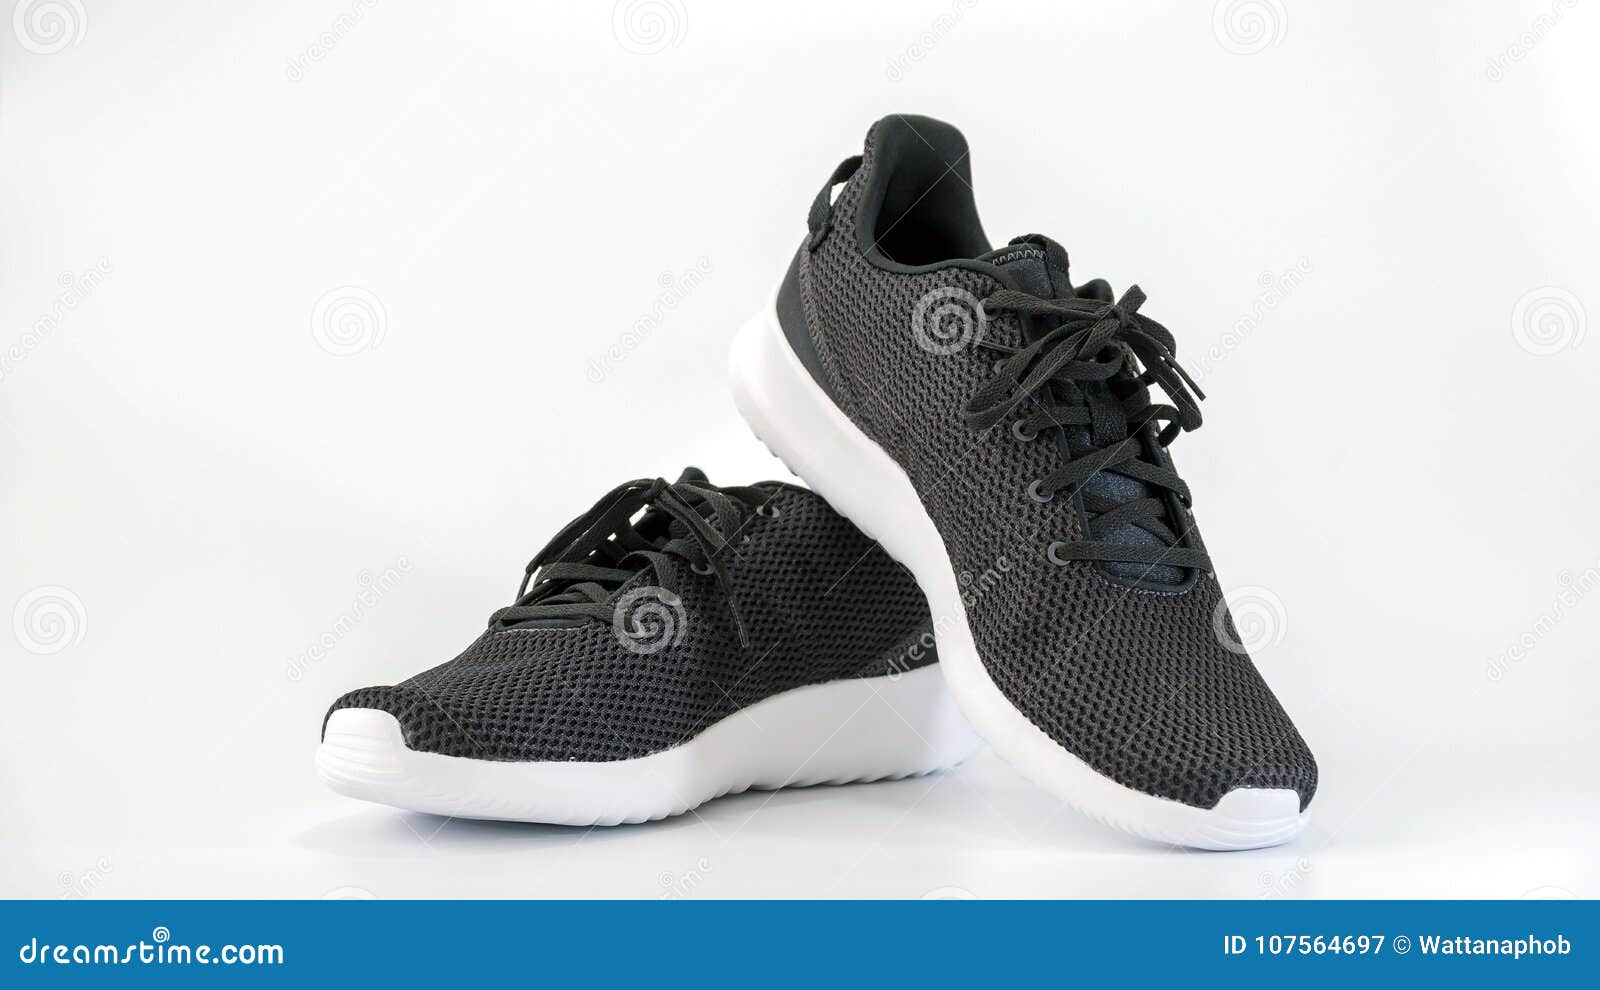 Black Sneakers Running Shoes Stock Image - Image of background, foot ...